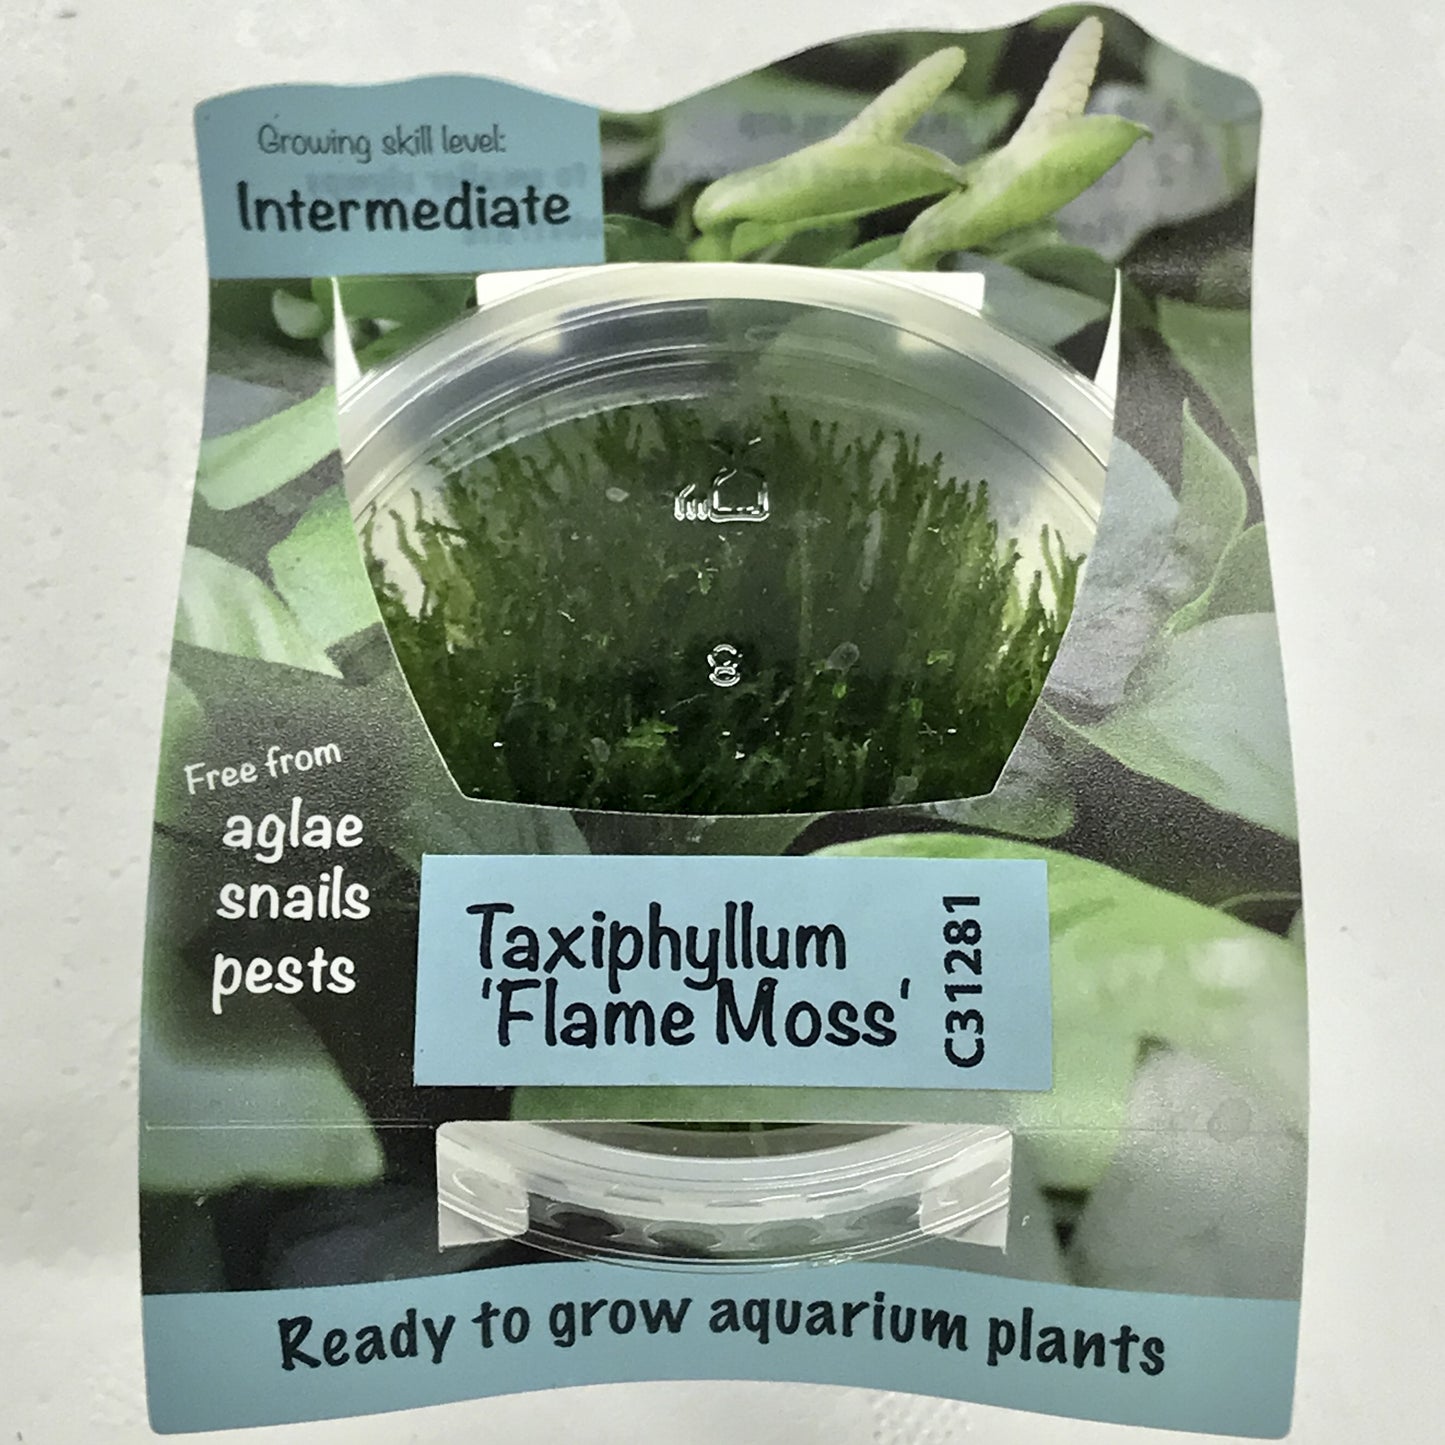 Taxiphyllum "Flame Moss" Tissue Culture